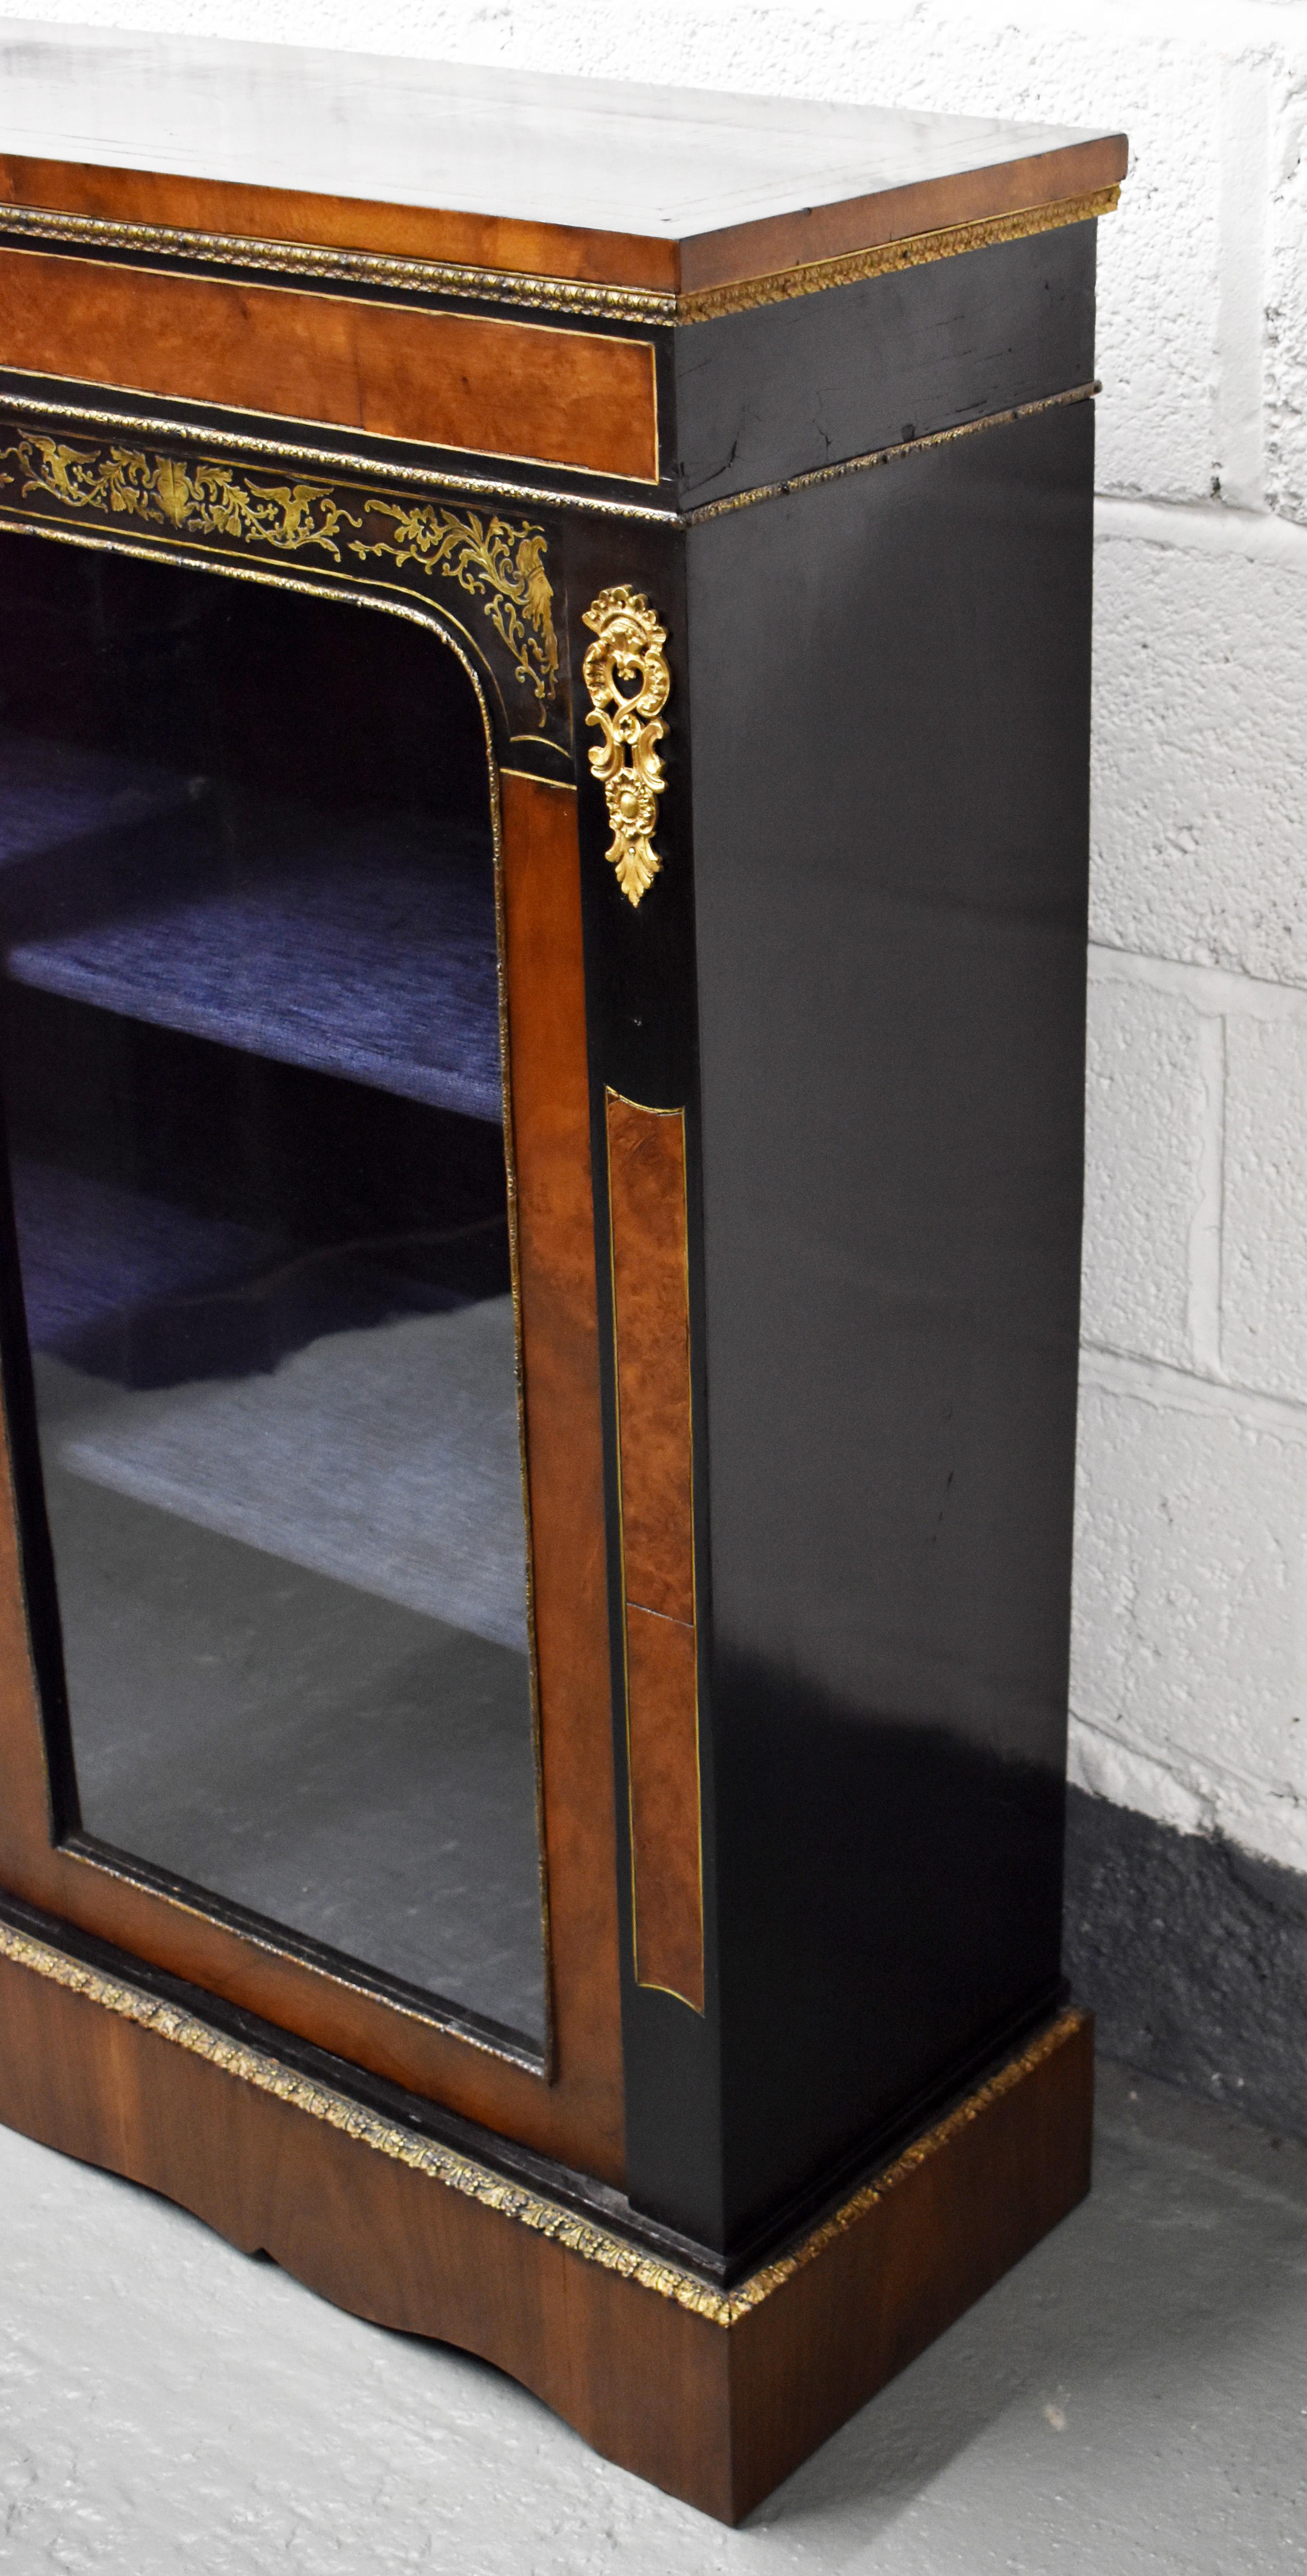 19th Century English Victorian Walnut and Ebonized Brass Inlaid Pier Cabinet For Sale 4